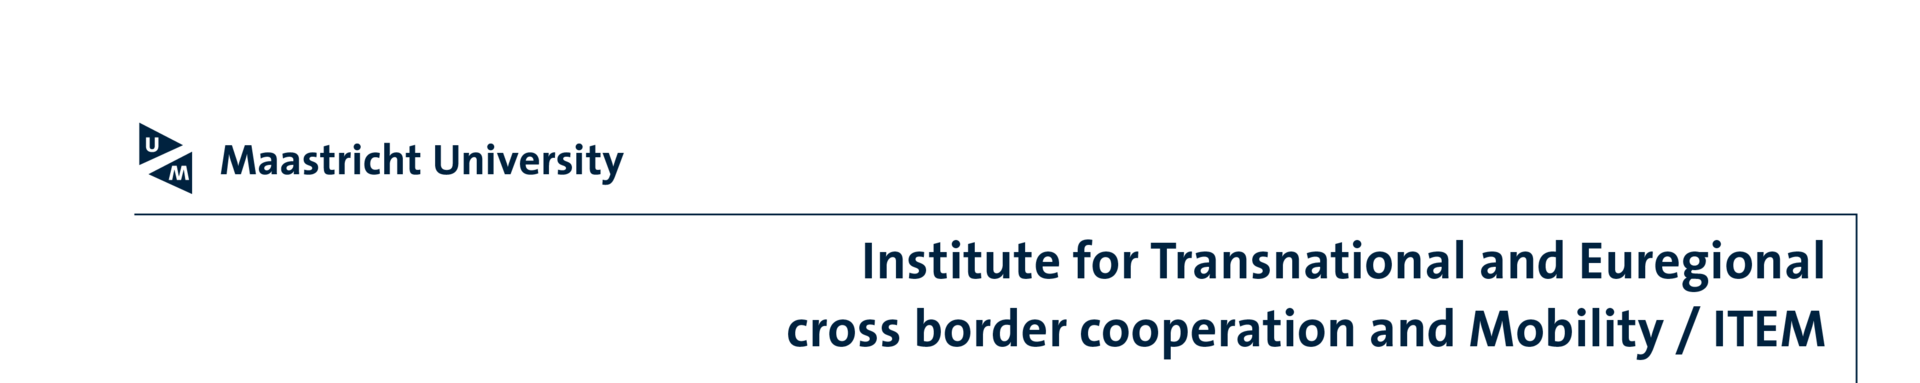 NEXT ITEM: How to measure cross-border cooperation in the framework of Interreg programmes?